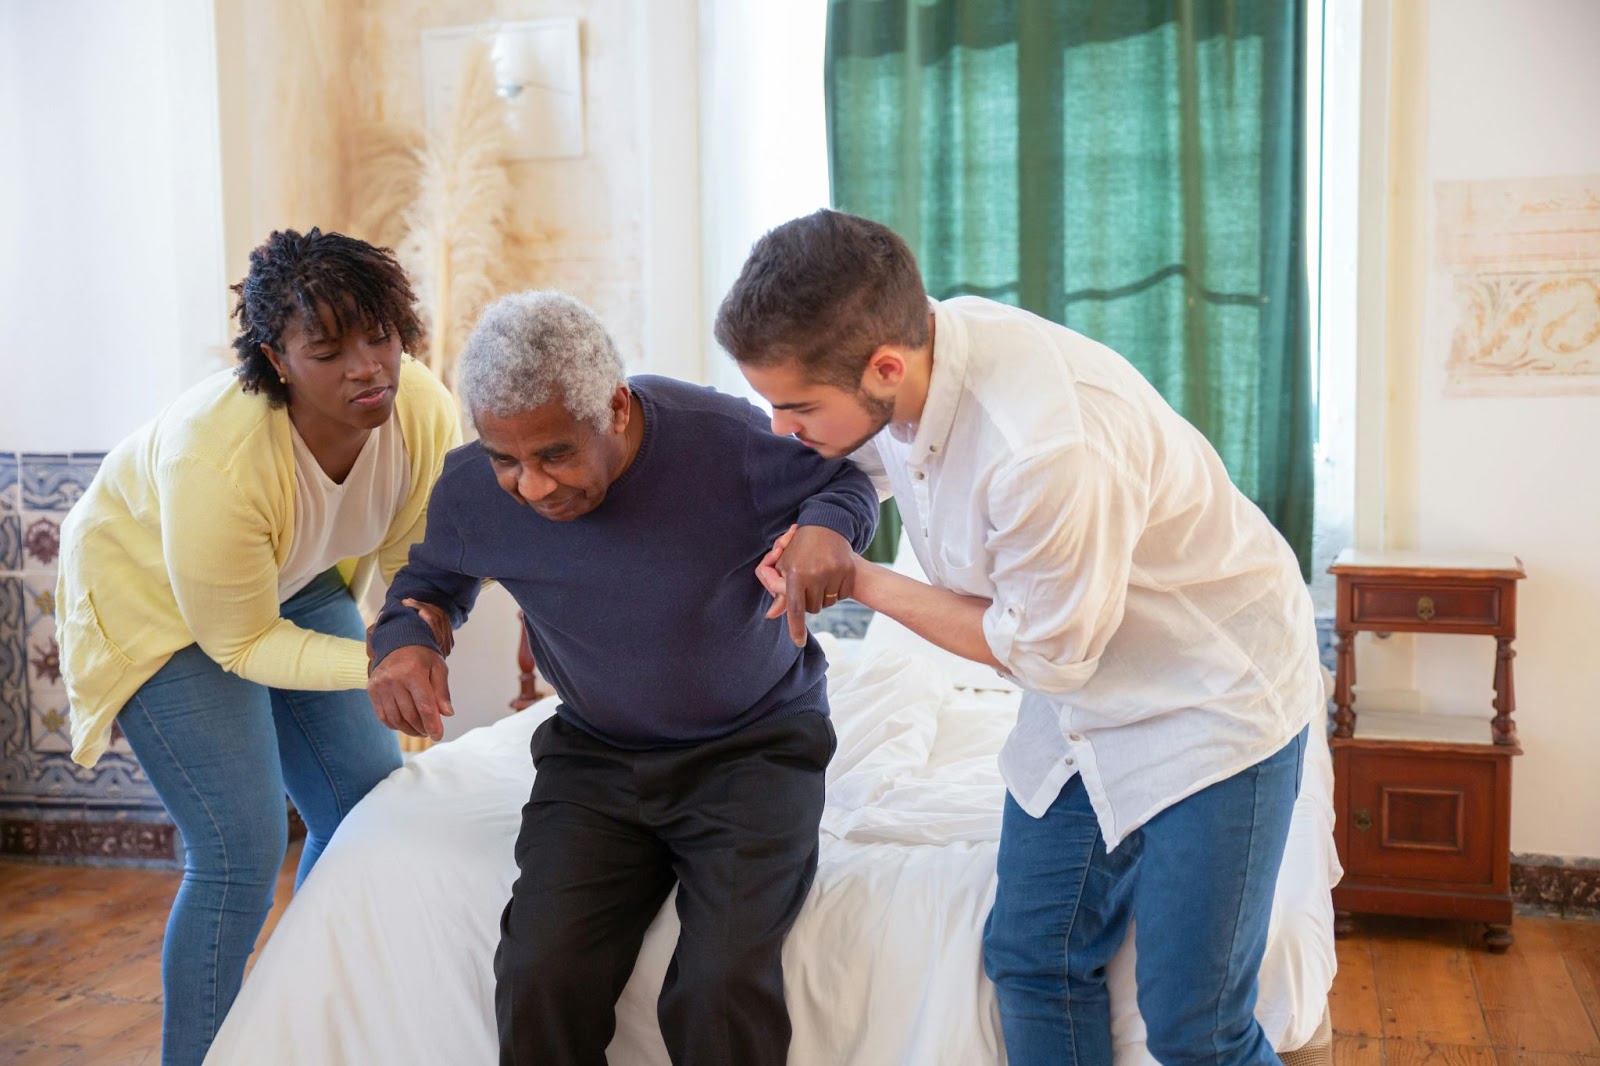 Two caregivers helping a senior citizen out of bed